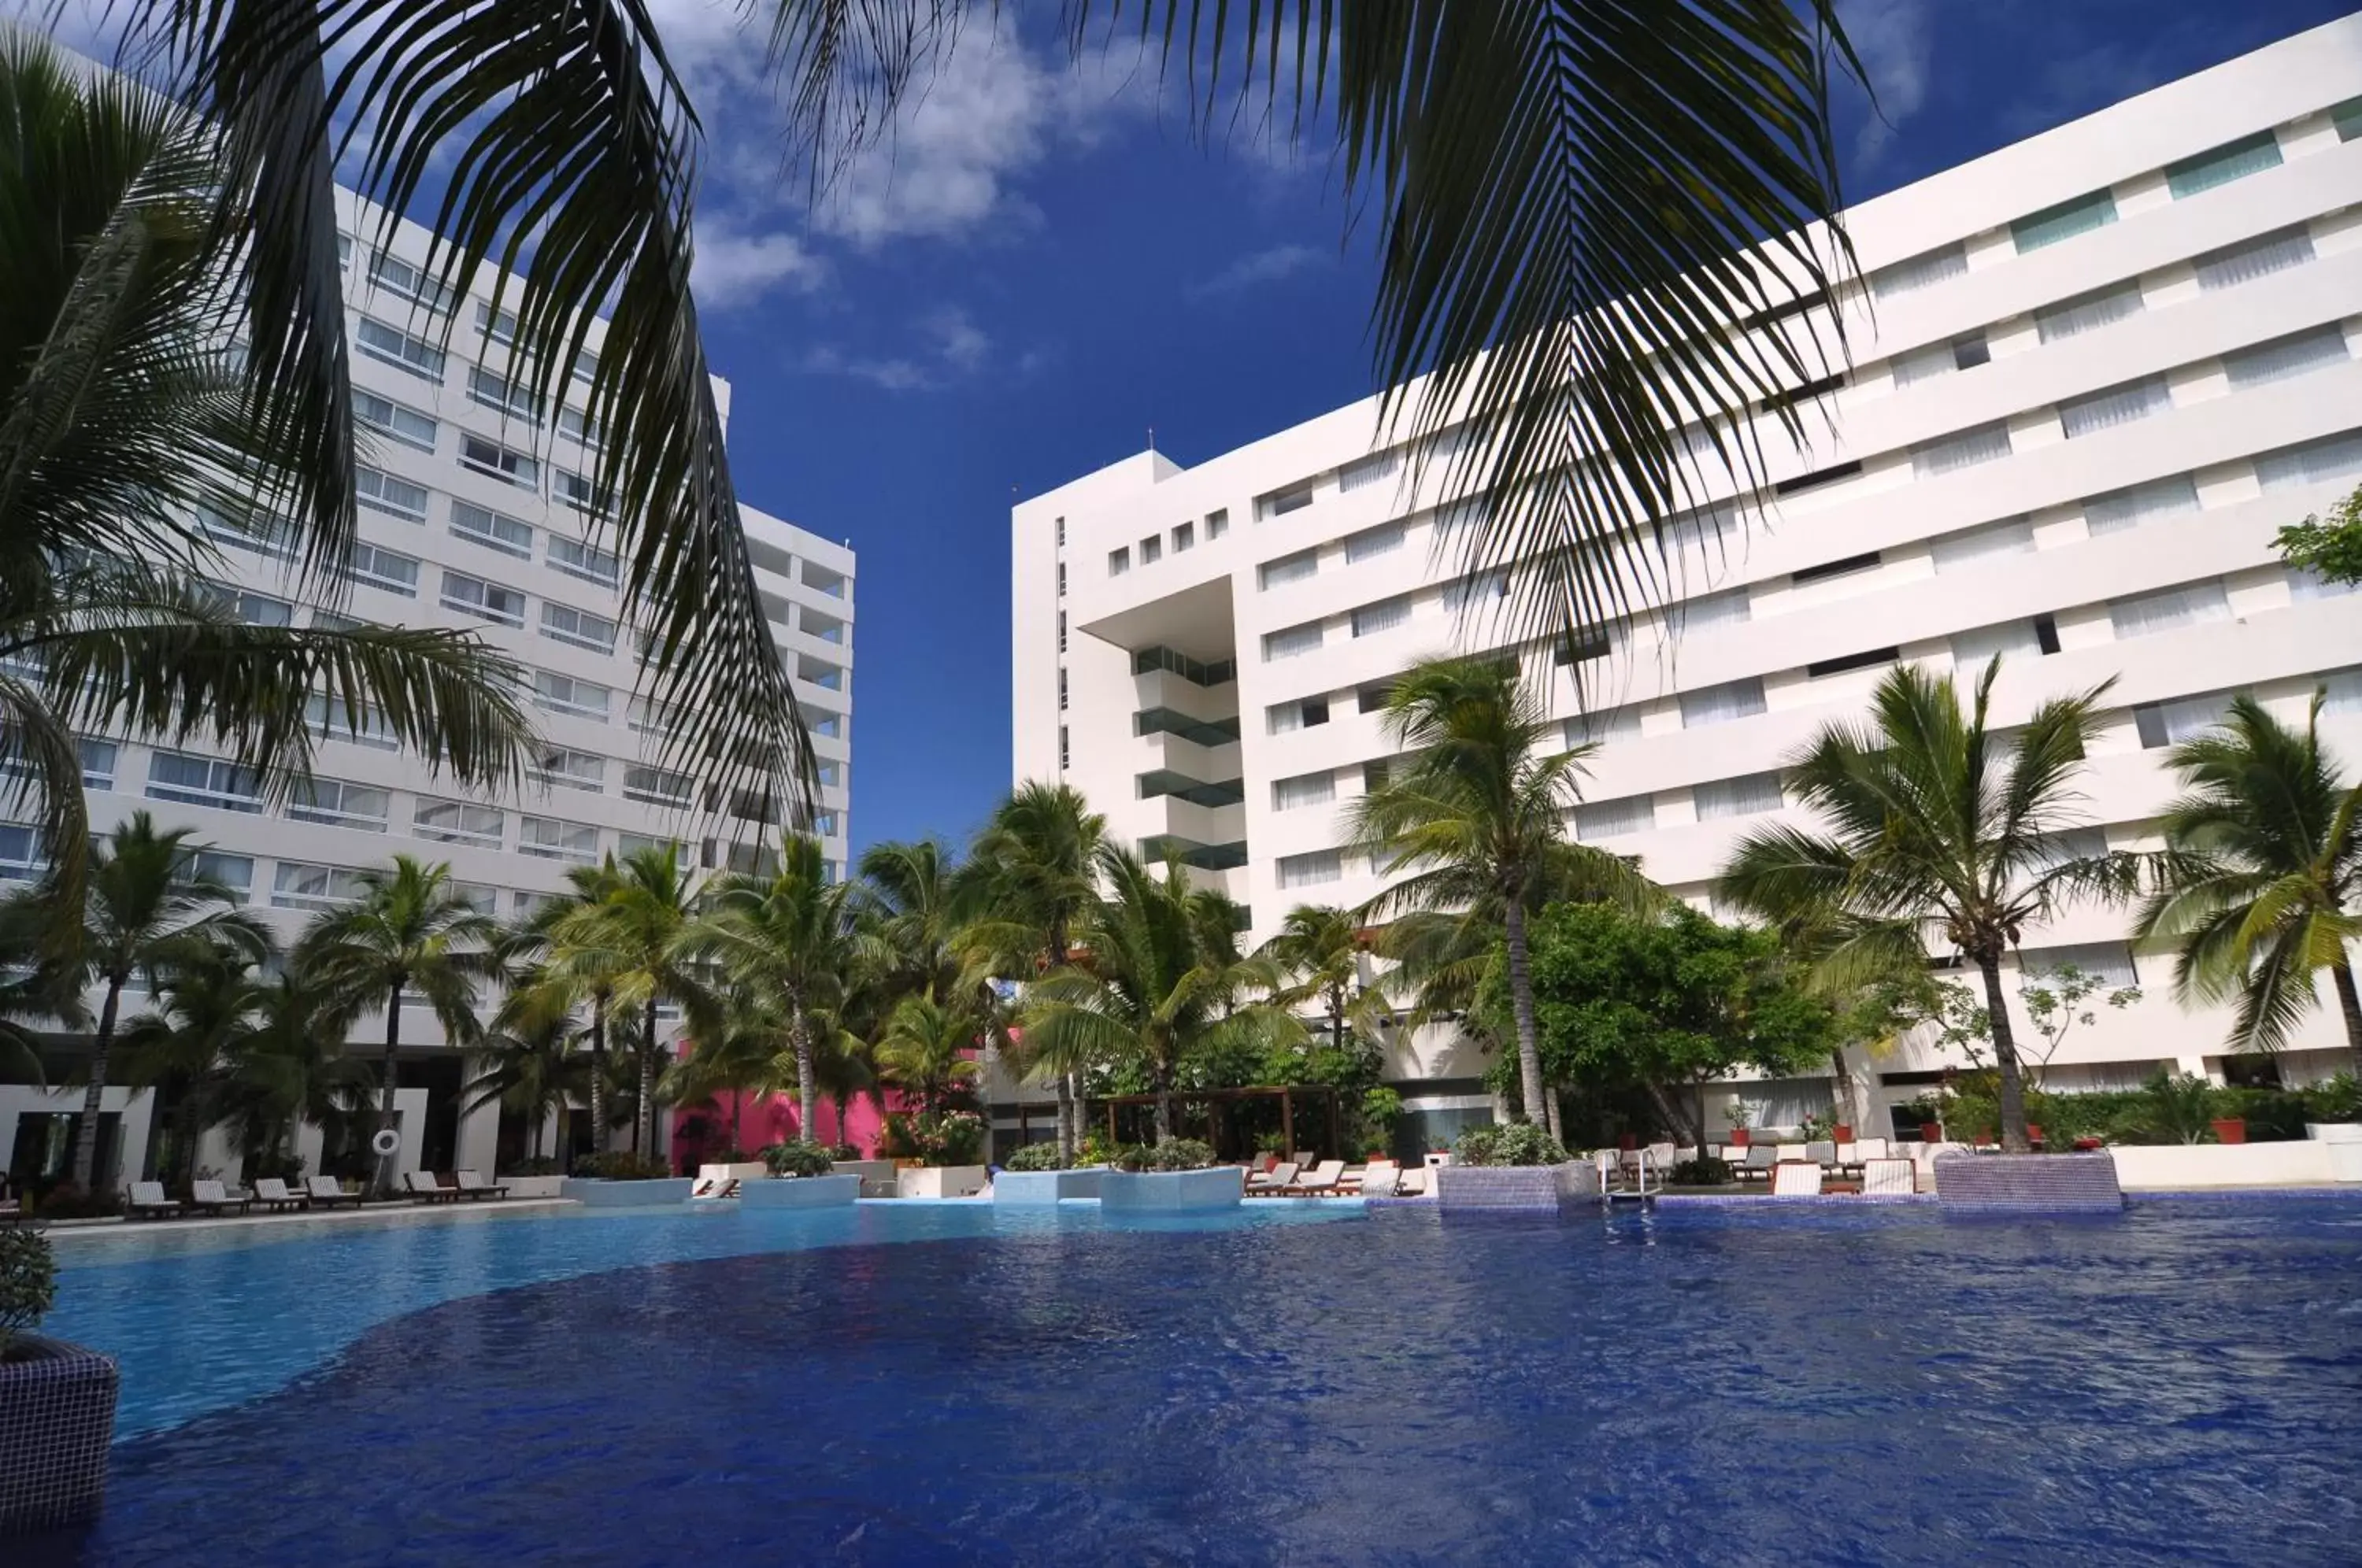 Property building, Swimming Pool in The Sens Cancun - All Inclusive